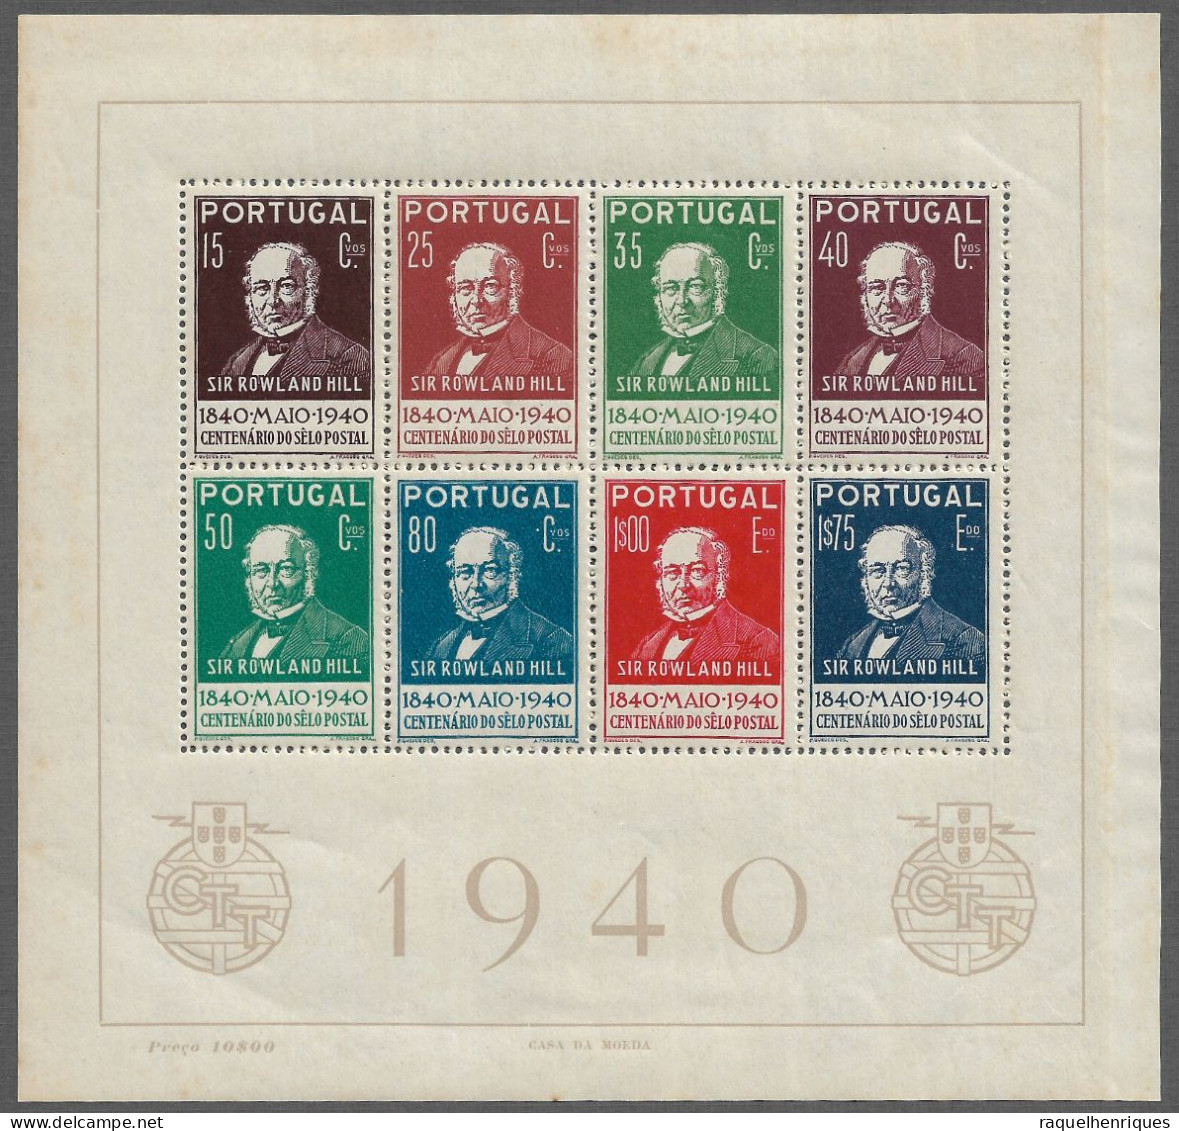 PORTUGAL STAMP - 1940 100th An. Of The Worlds First Postage Stamp MINISHEET MNH (NP#67-P38) - Neufs